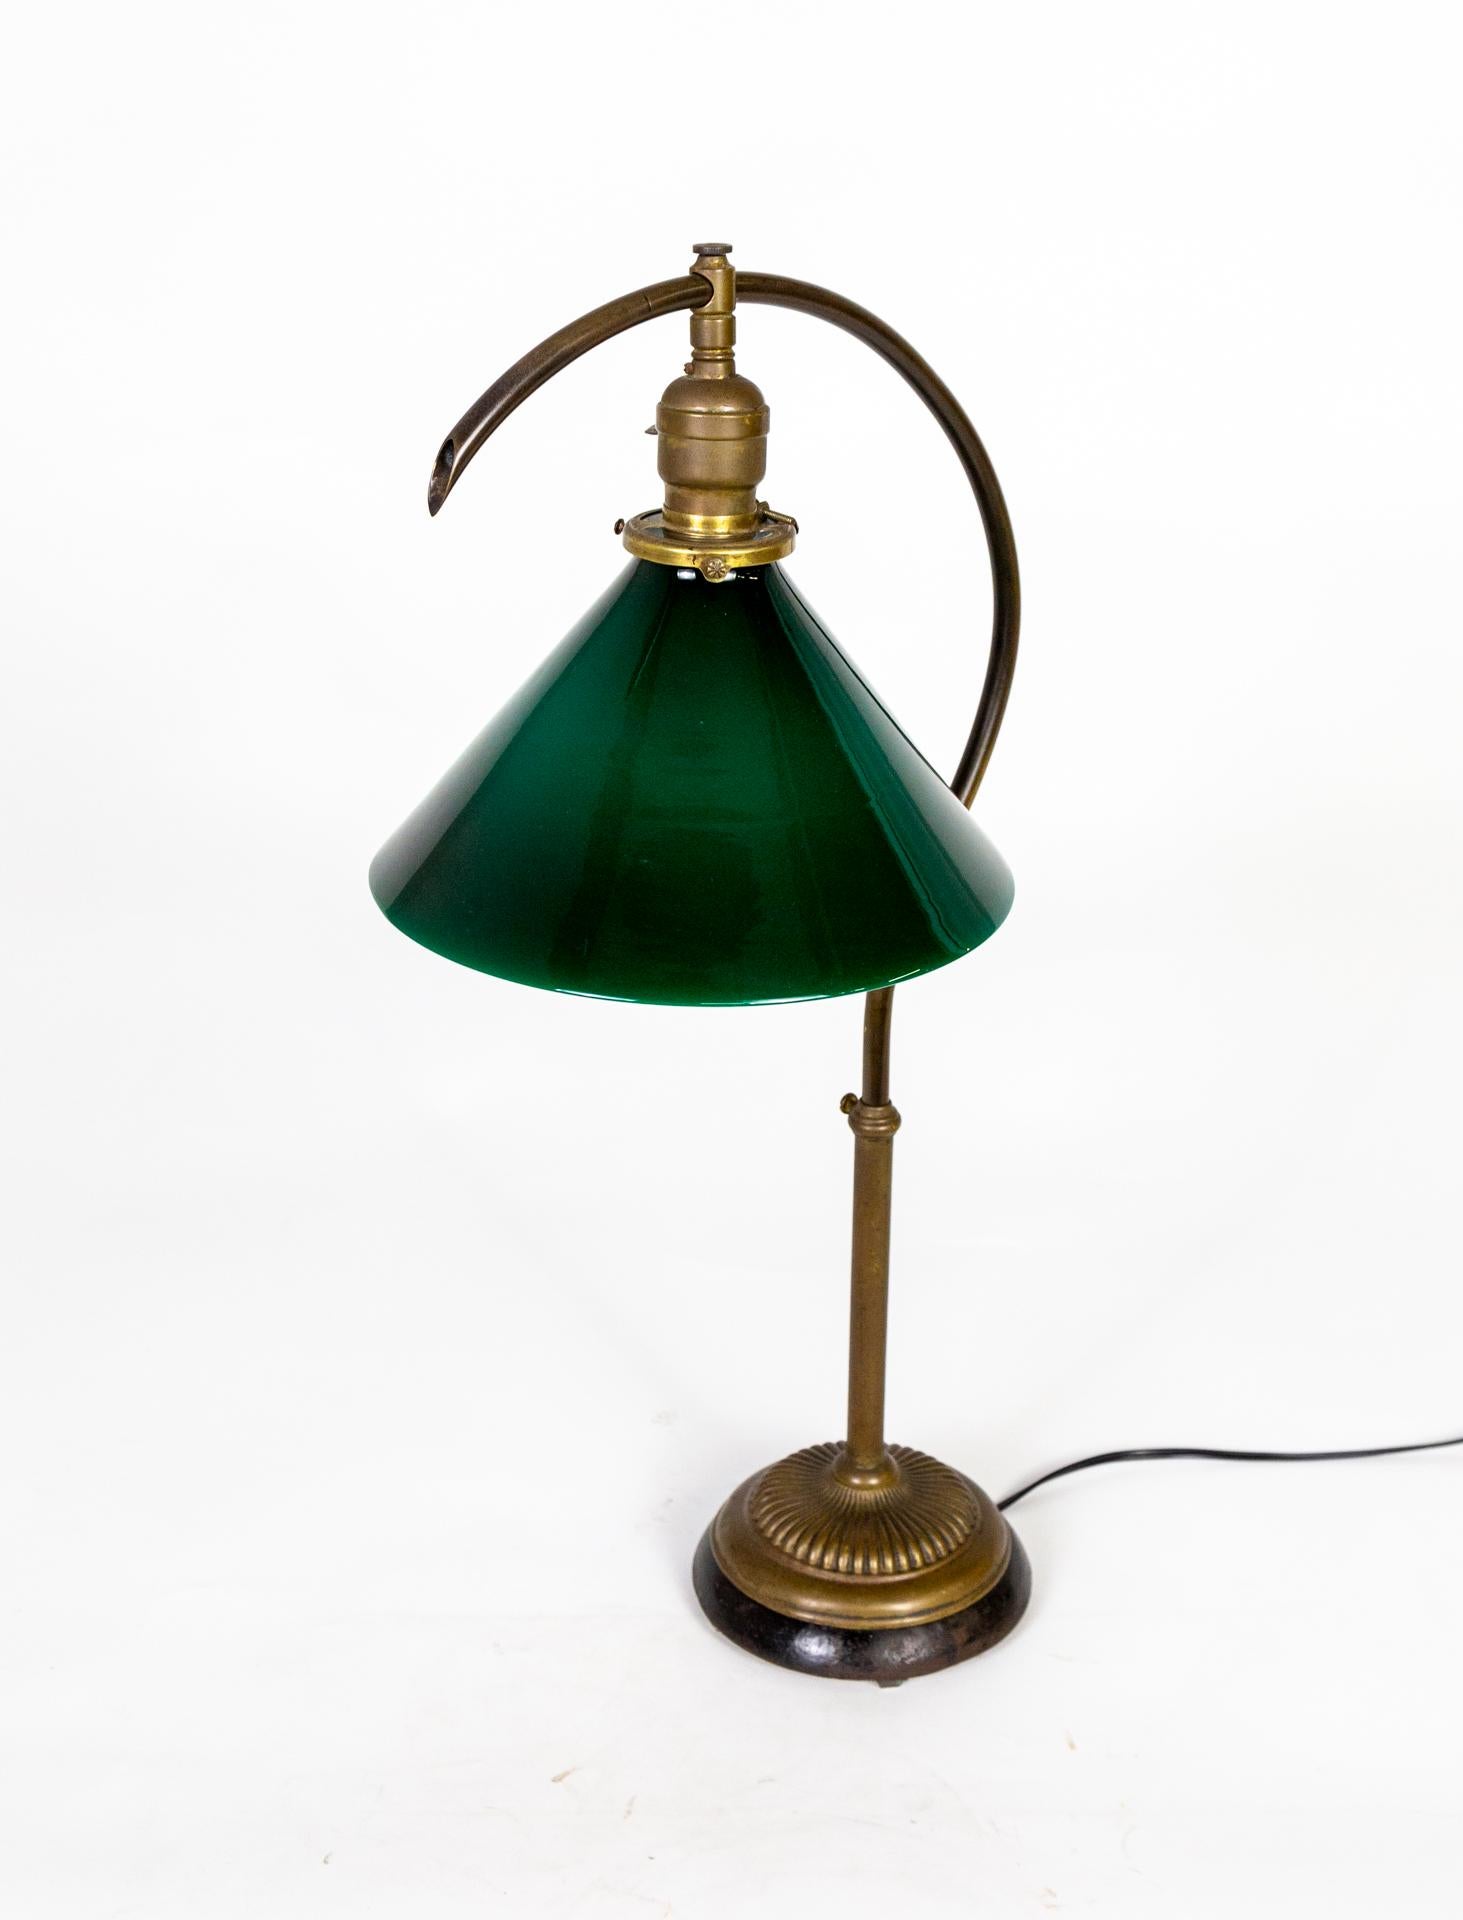 Early 20th Century Early 20th C. Emeralite Goose Neck Office Lamp